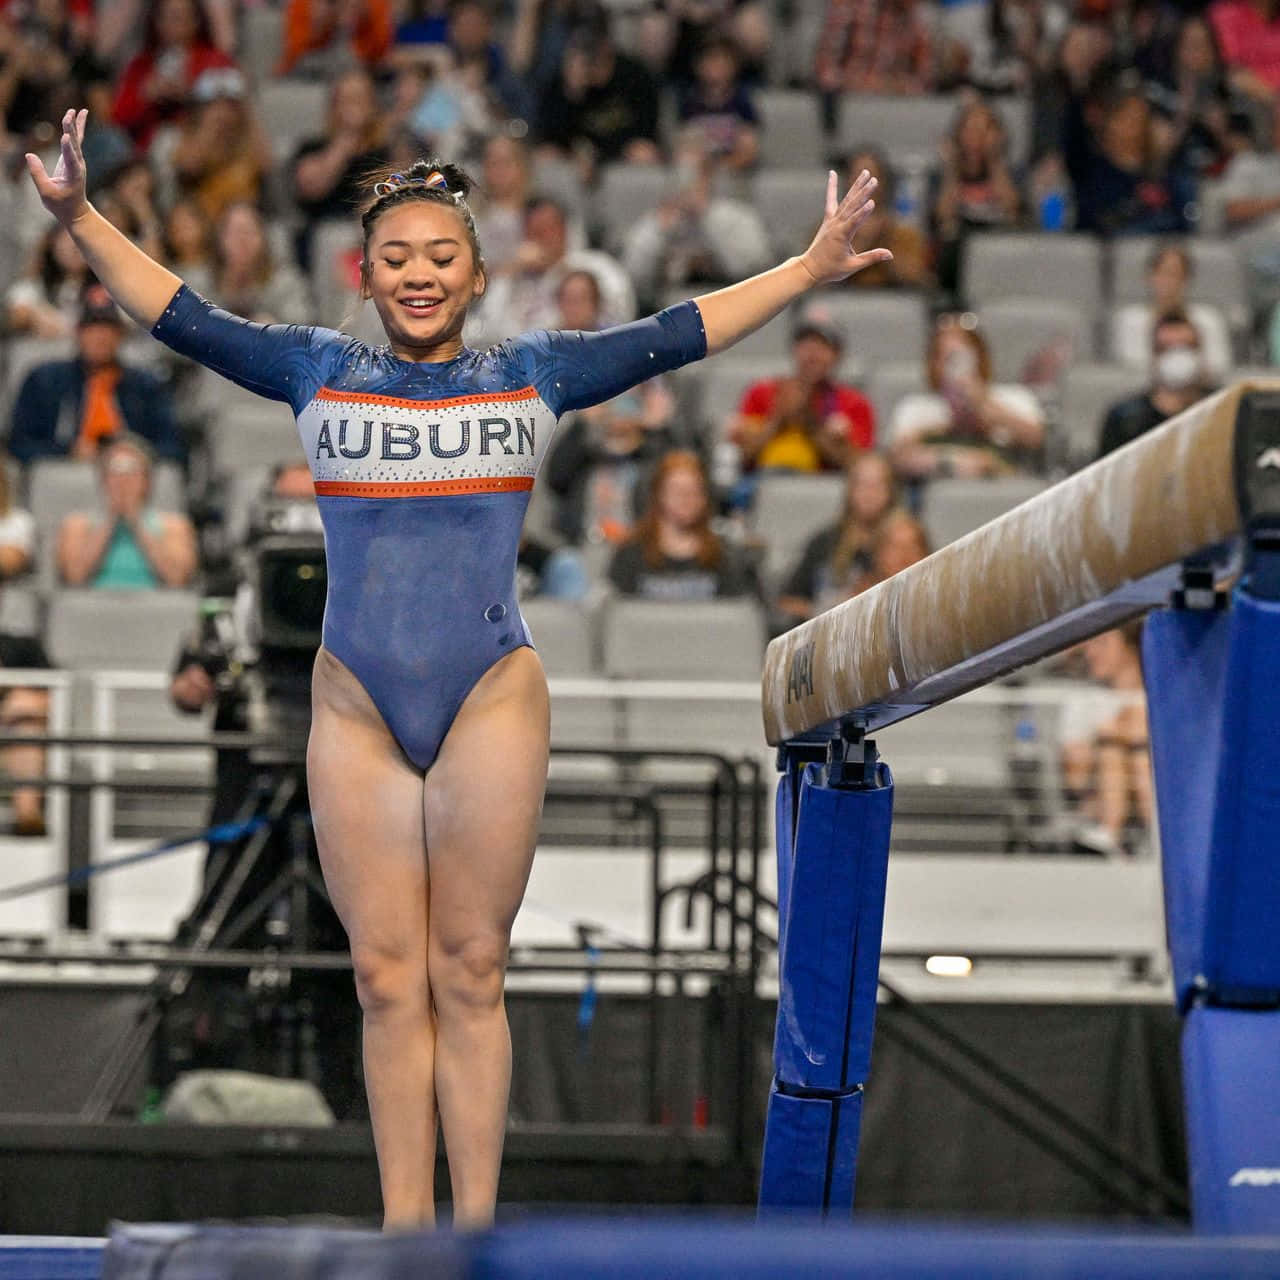 Download A Woman Is On The Balance Beam At A Competition